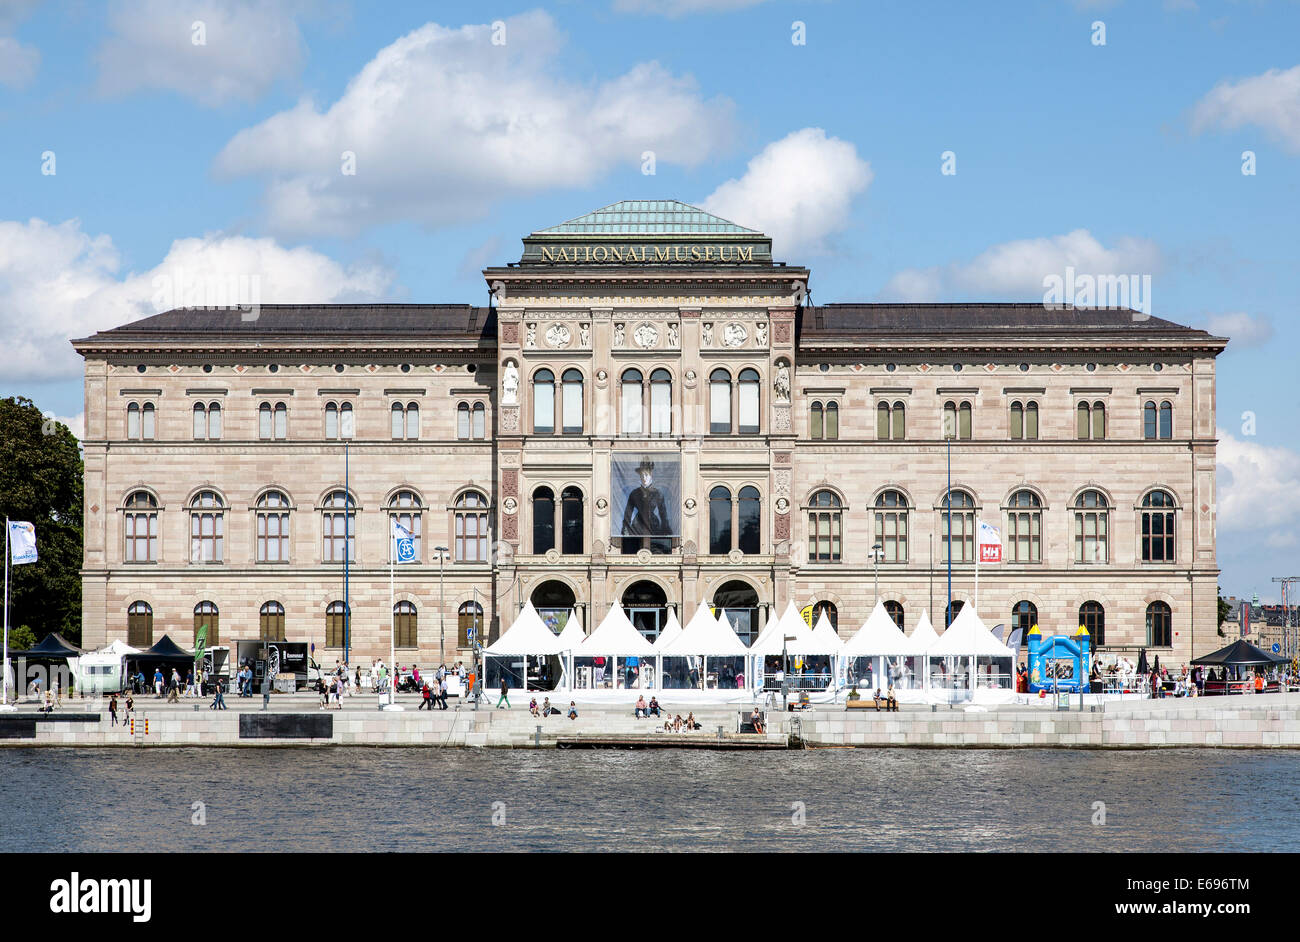 Nationalmuseum or National Museum of Fine Arts, art collection, art gallery, by architect Friedrich August Stüler, Stockholm Stock Photo